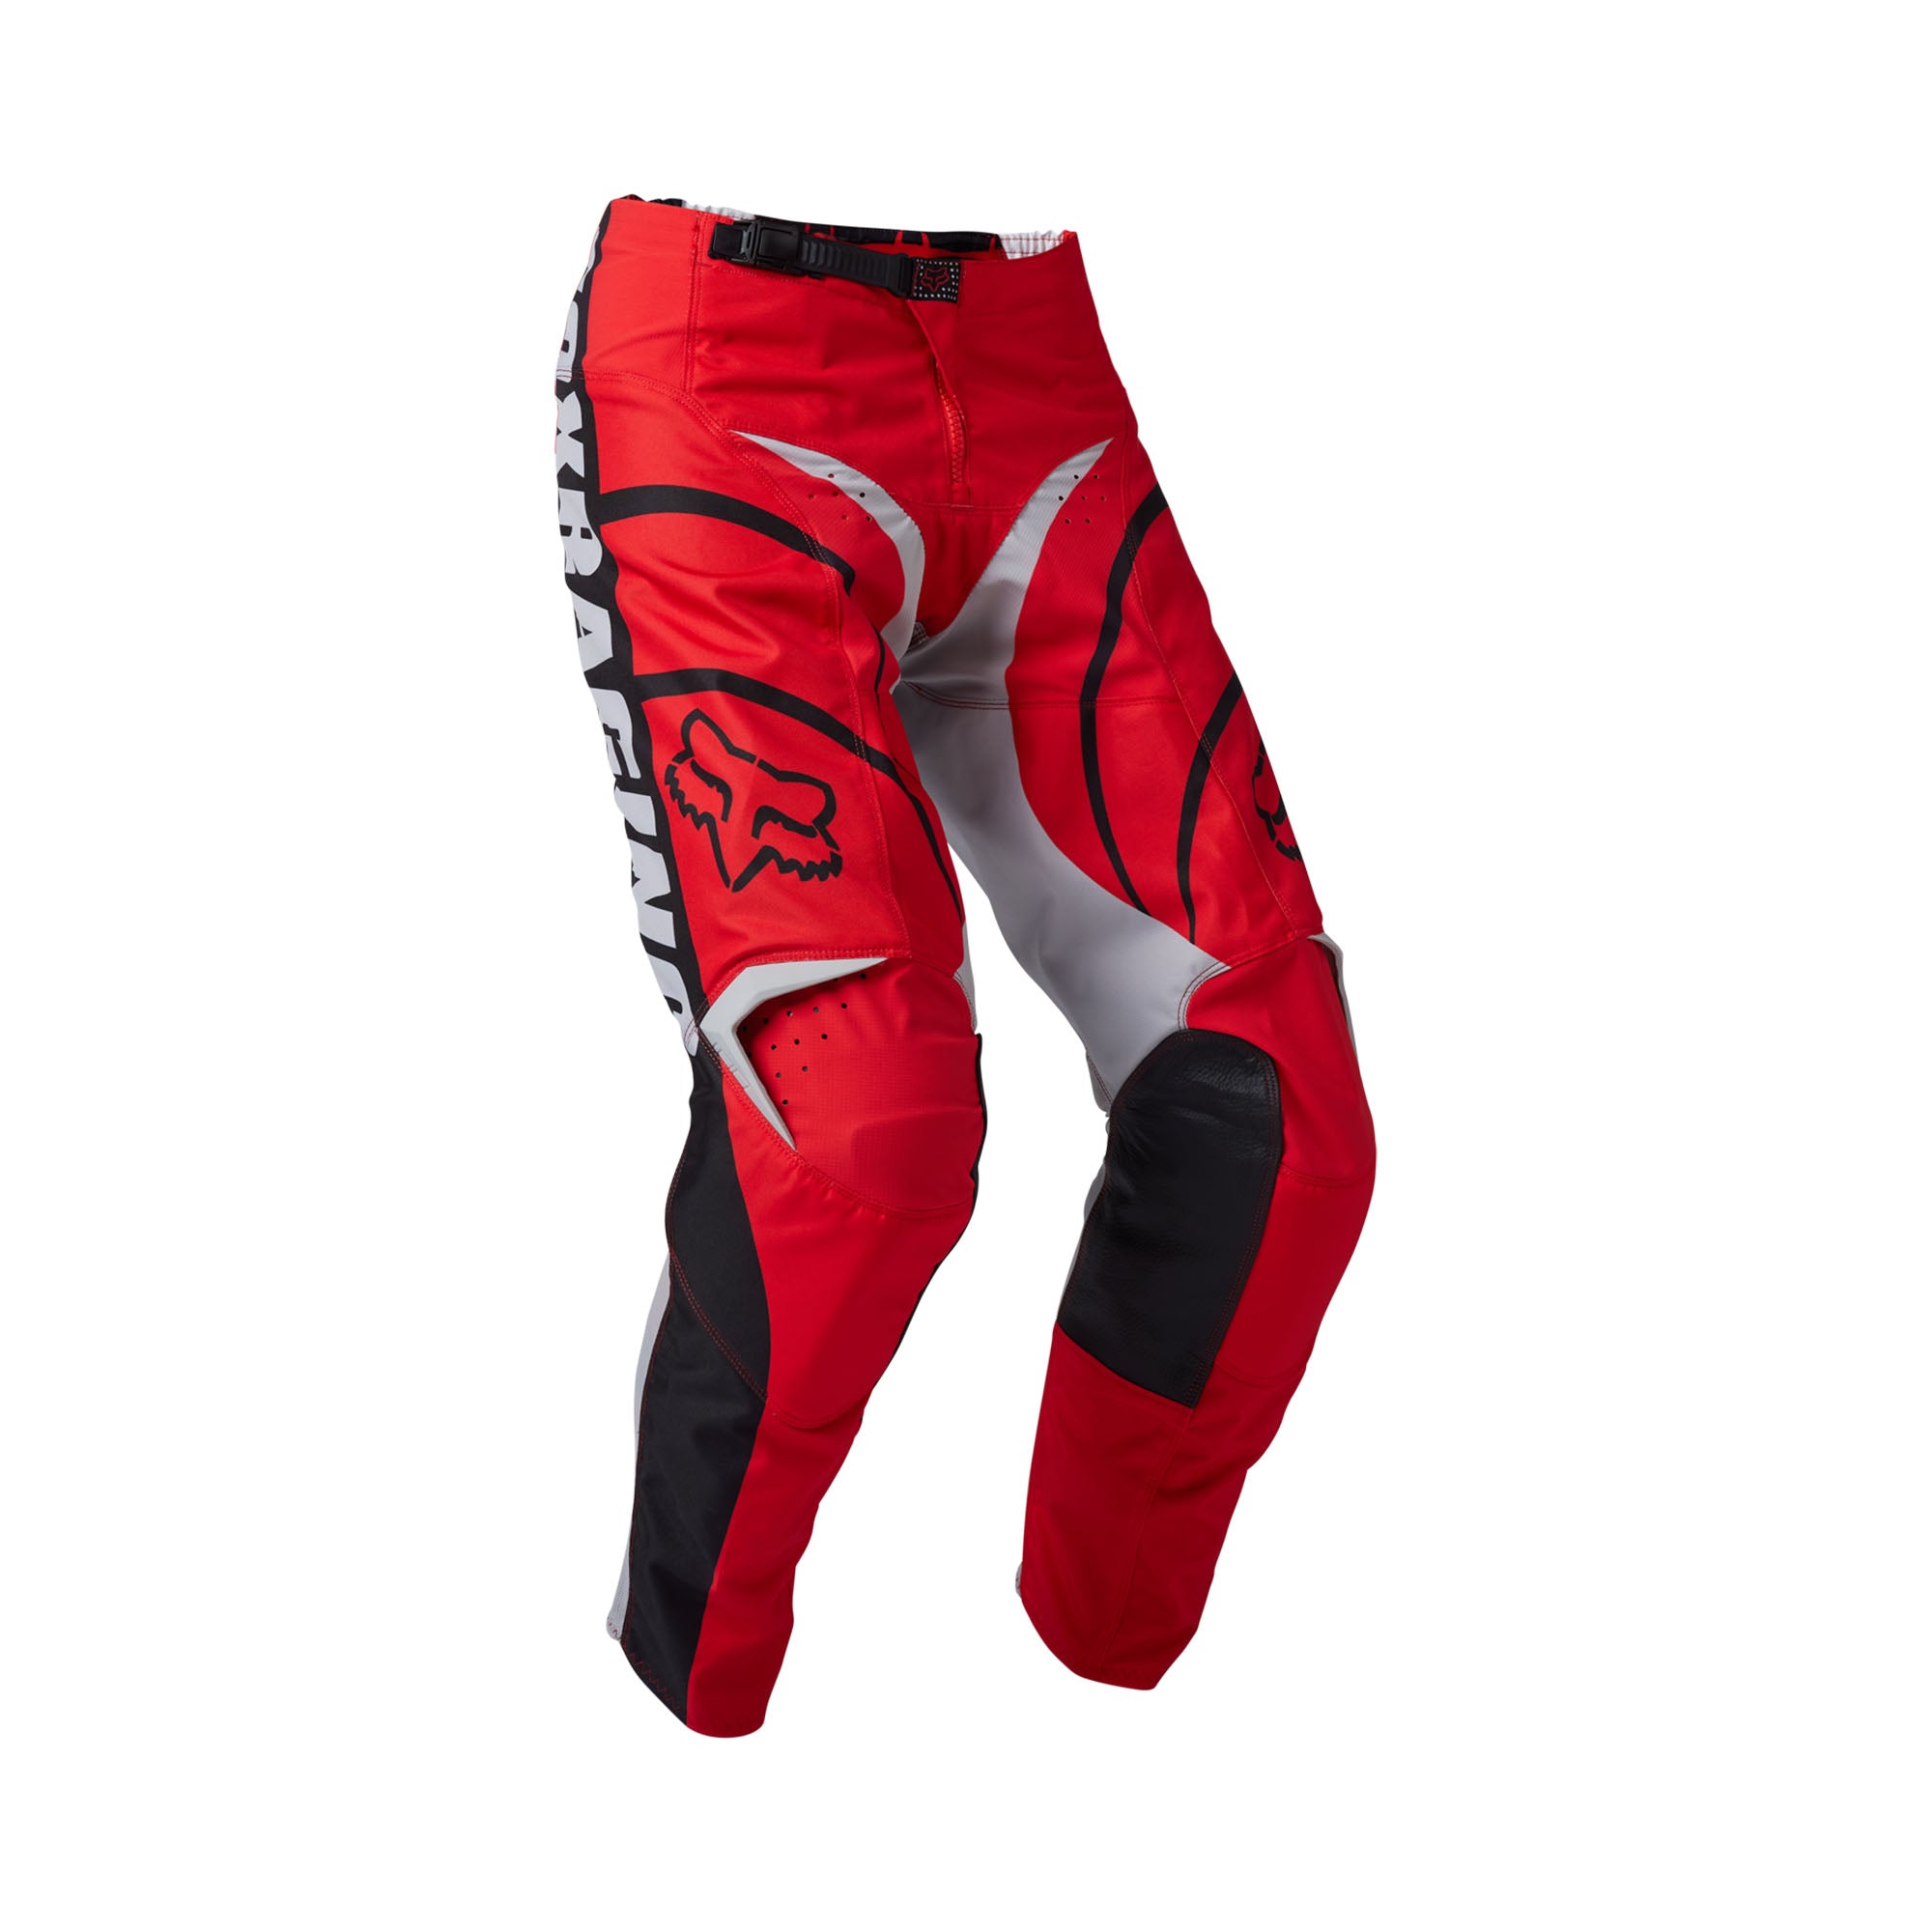 Fox Racing 180 Youth GOAT Strafer Pants